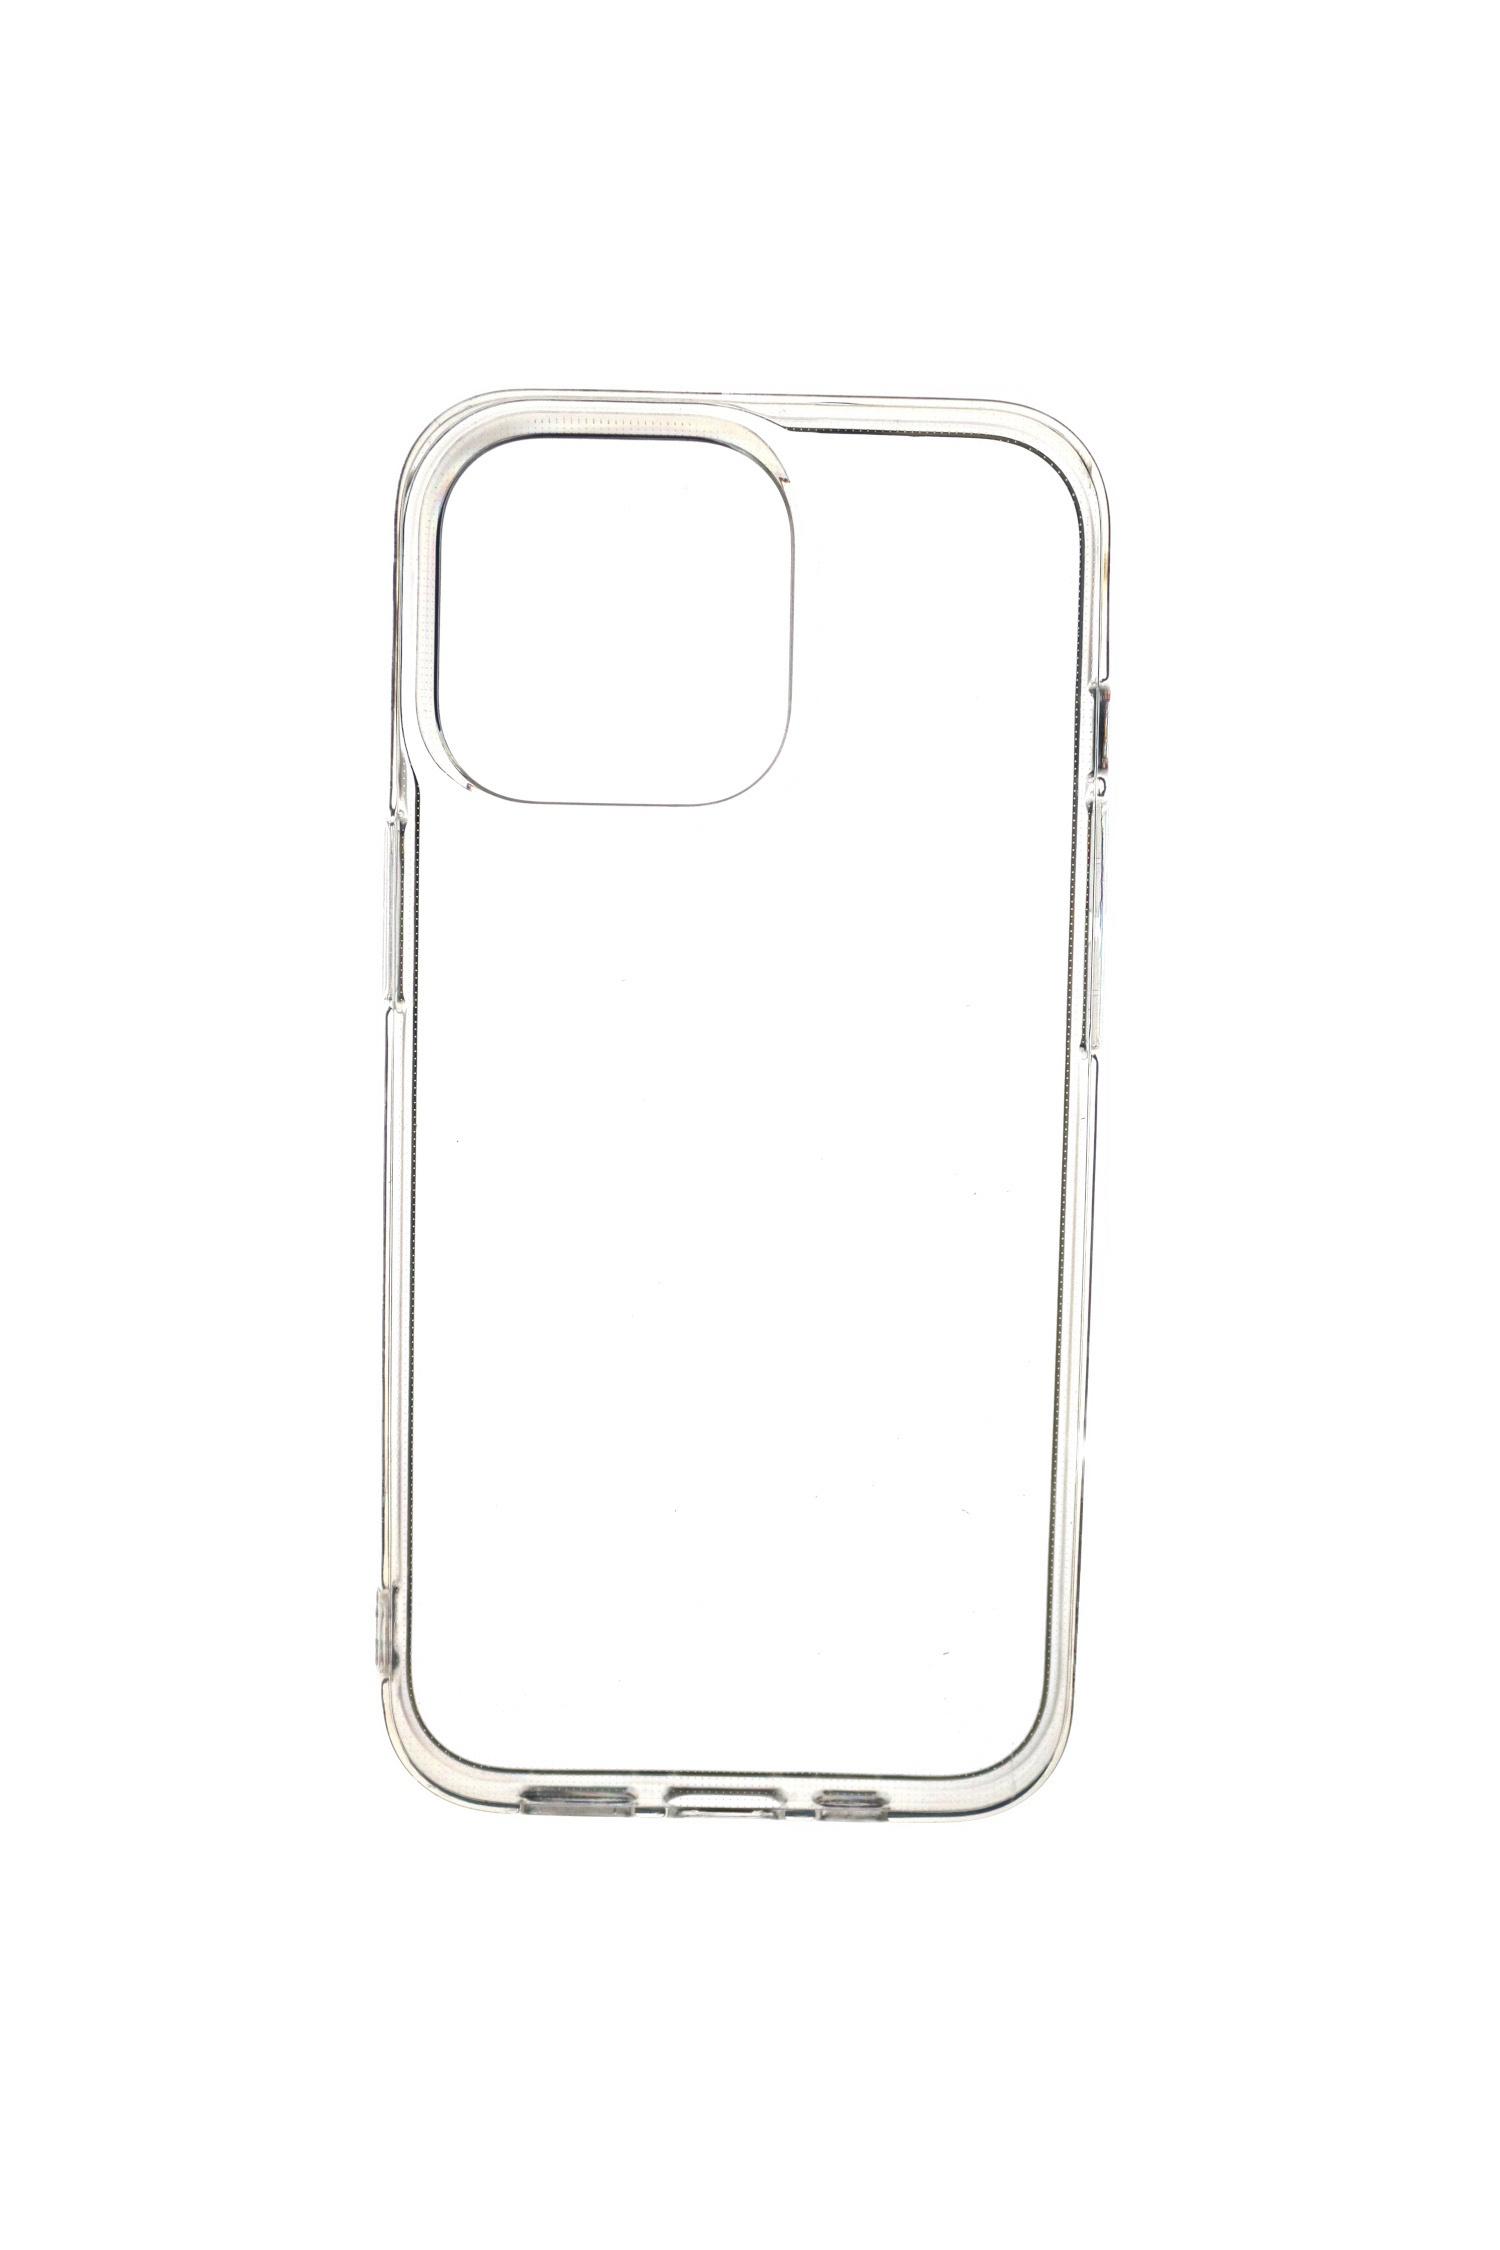 Pro, 14 2.0 mm Apple, Backcover, TPU iPhone Strong, Case Transparent JAMCOVER